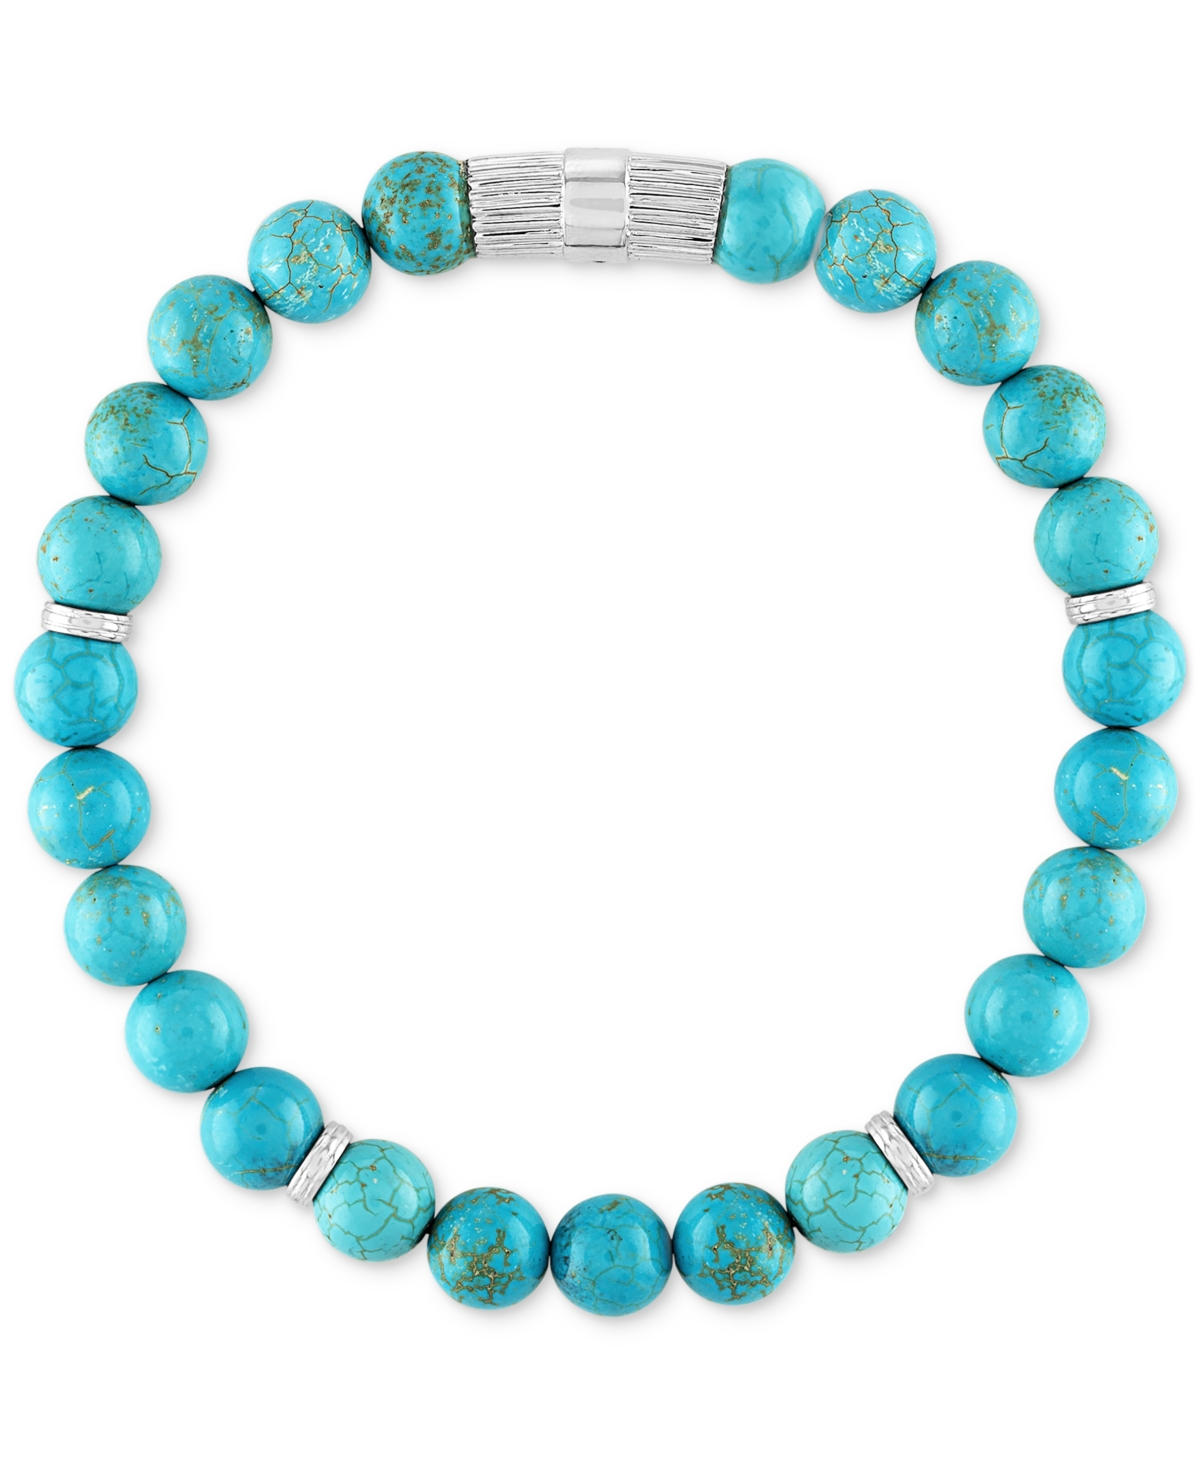 Reconstituted Turquoise Beaded Stretch Bracelet in Sterling Silver, Created for Macy's - Silver